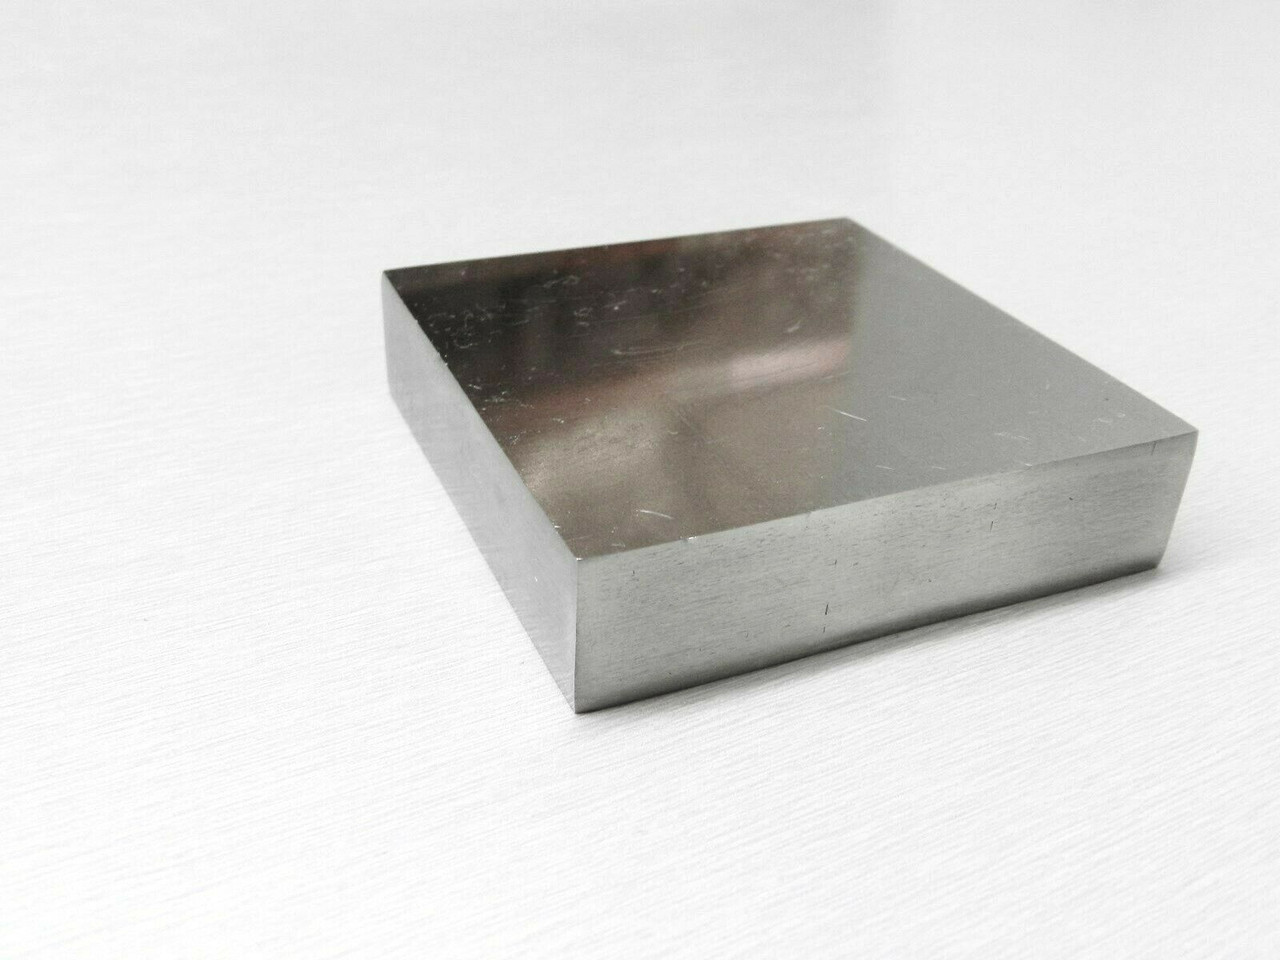 Steel Block 3" Square Bench Tool Jewelry Making Metal Working Anvil 3/4" Thick